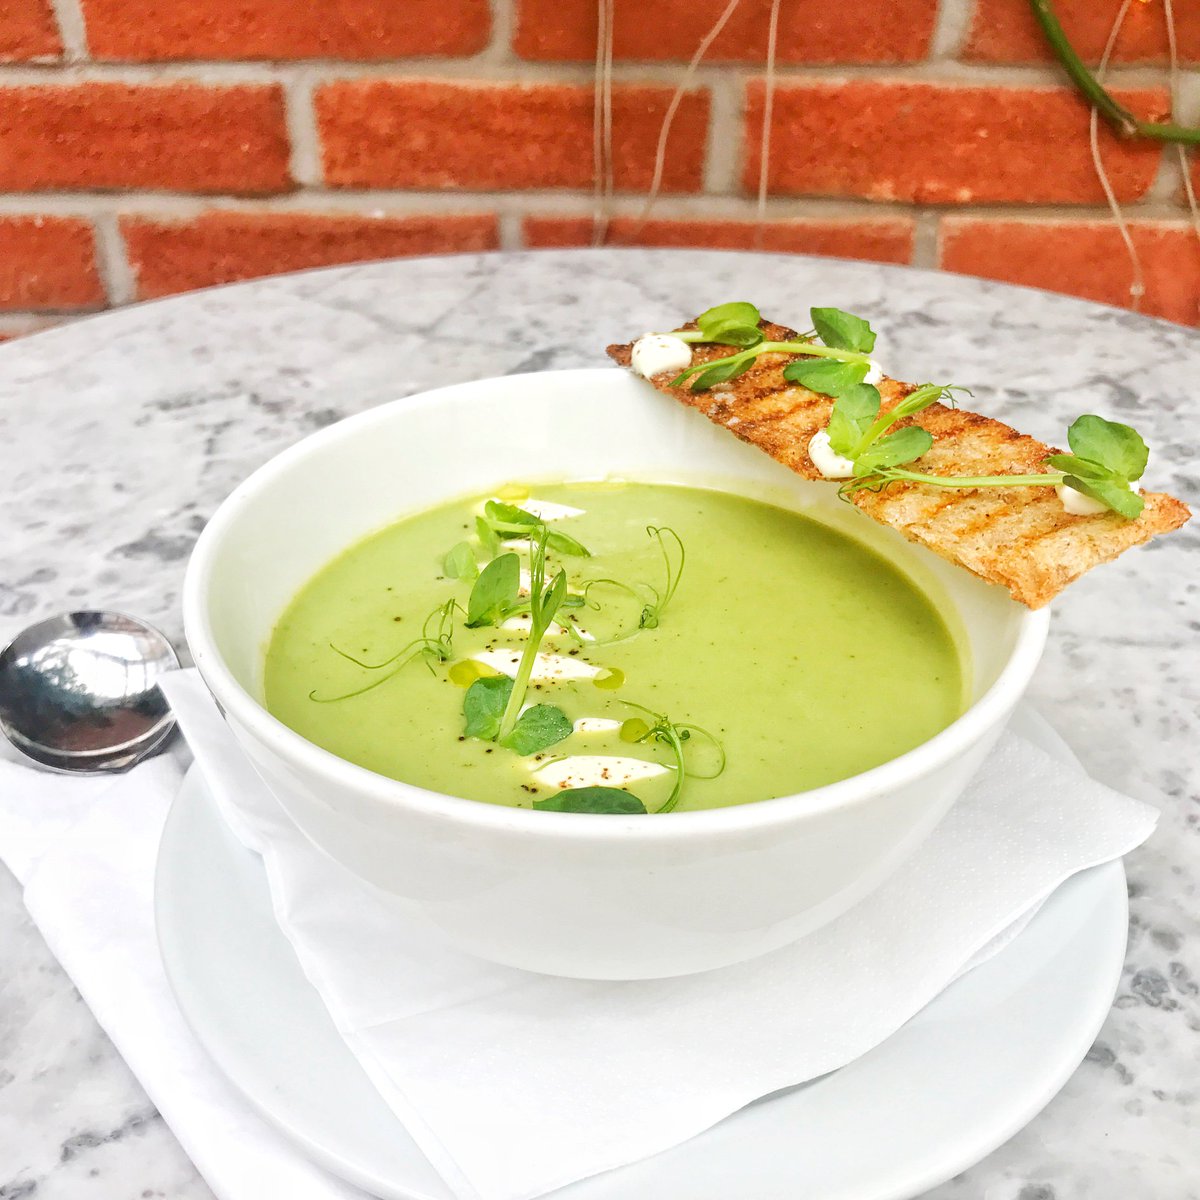 Springtime calls for our English Pea & Mint Soup, a silky summer soup served hot or chilled, made with fresh local English peas, mint Chantilly cream and sourdough toast on the side. #DABLondon #DominiqueAnselLondon